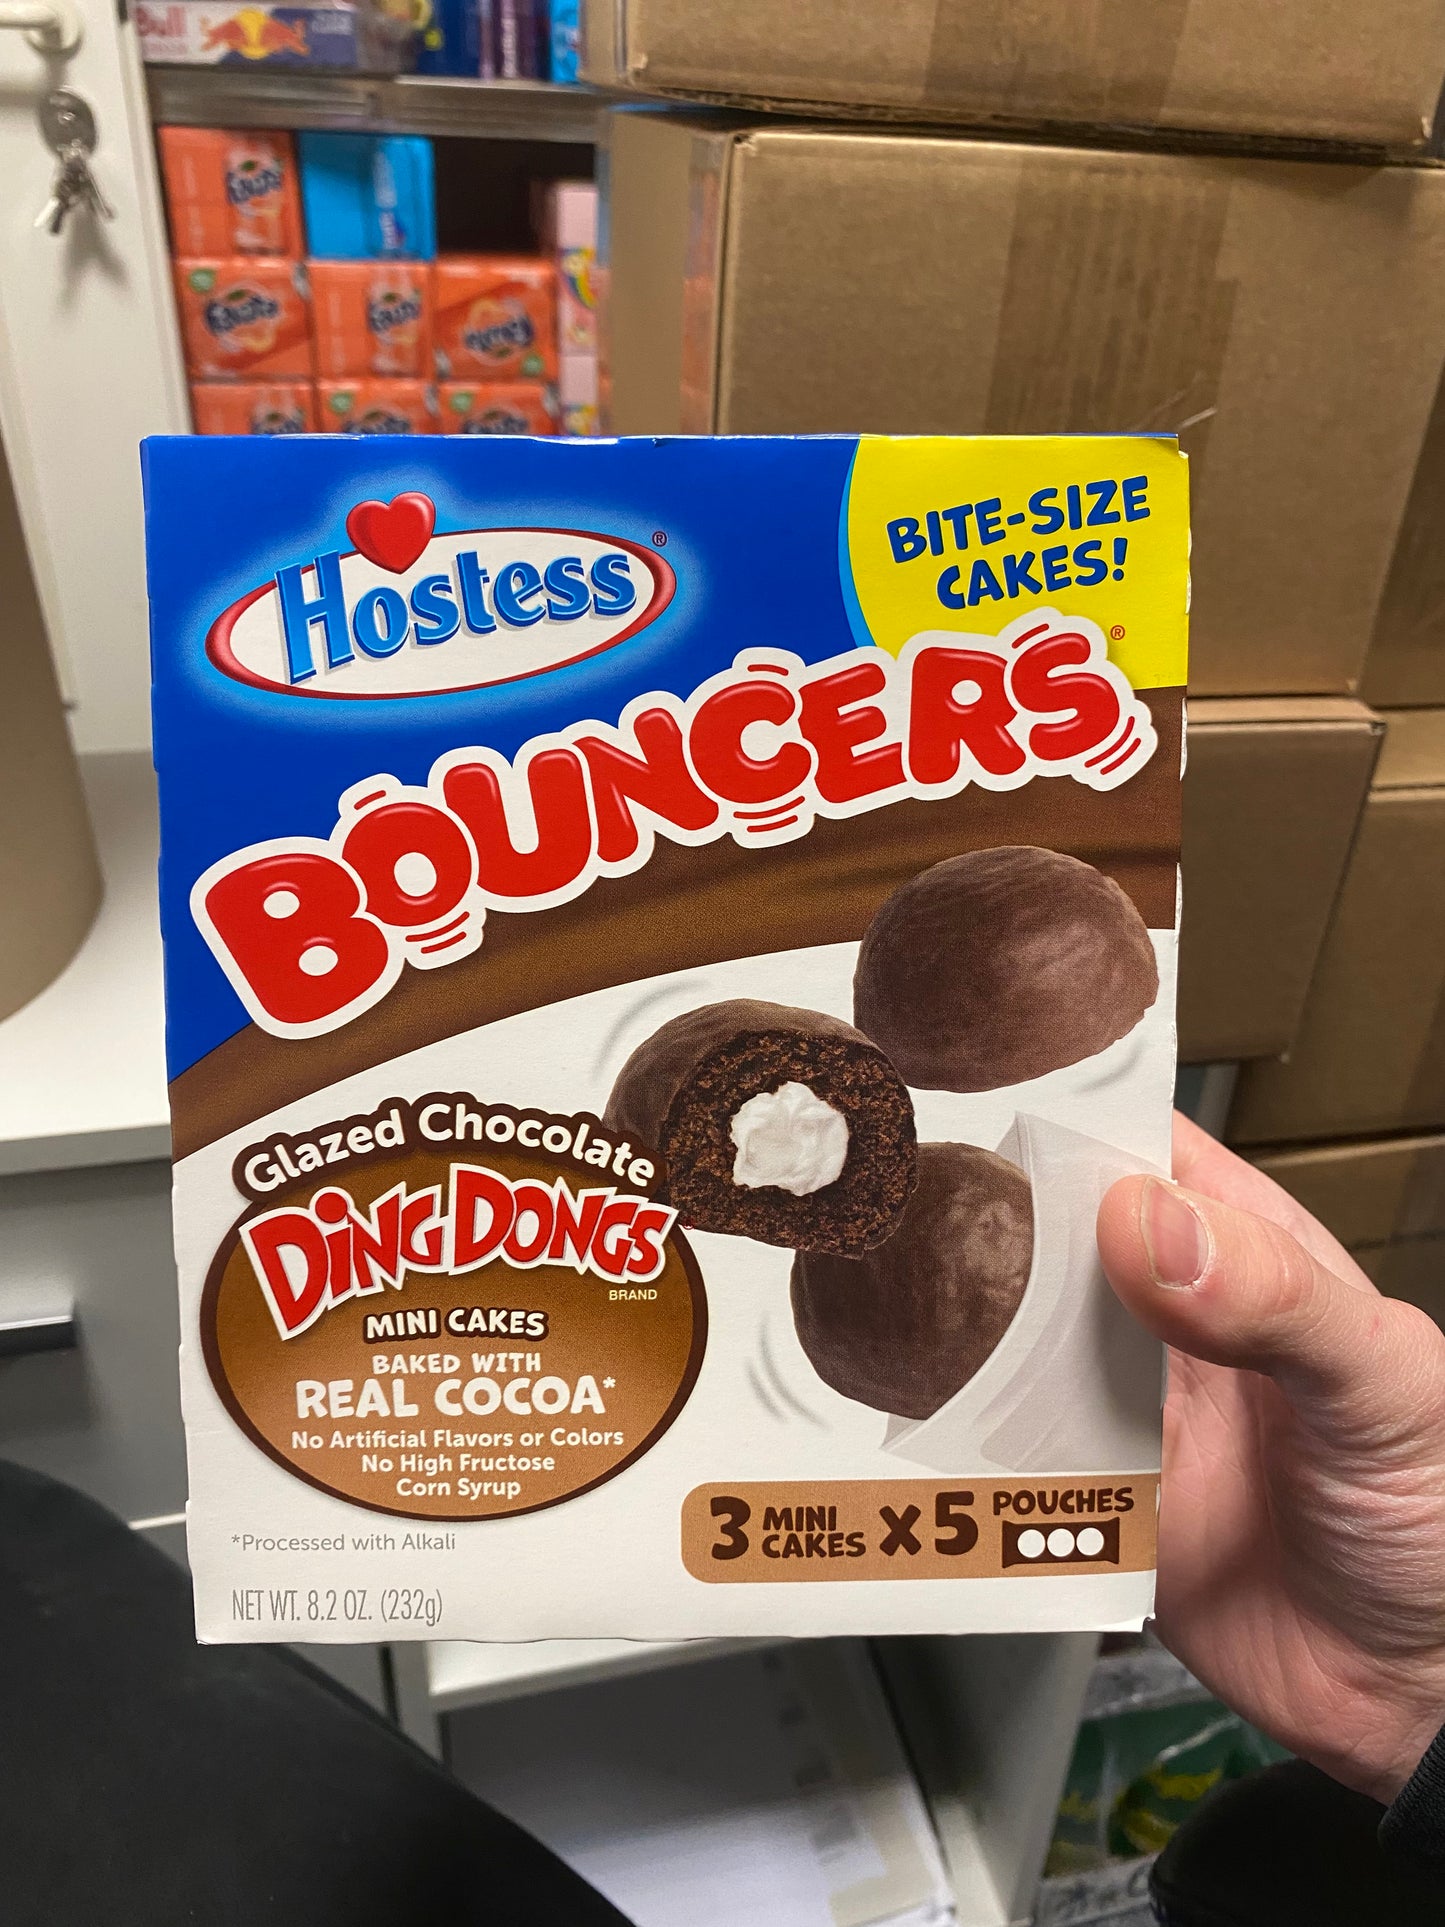 Hostess Bouncers Glazed Ding Dong 283g